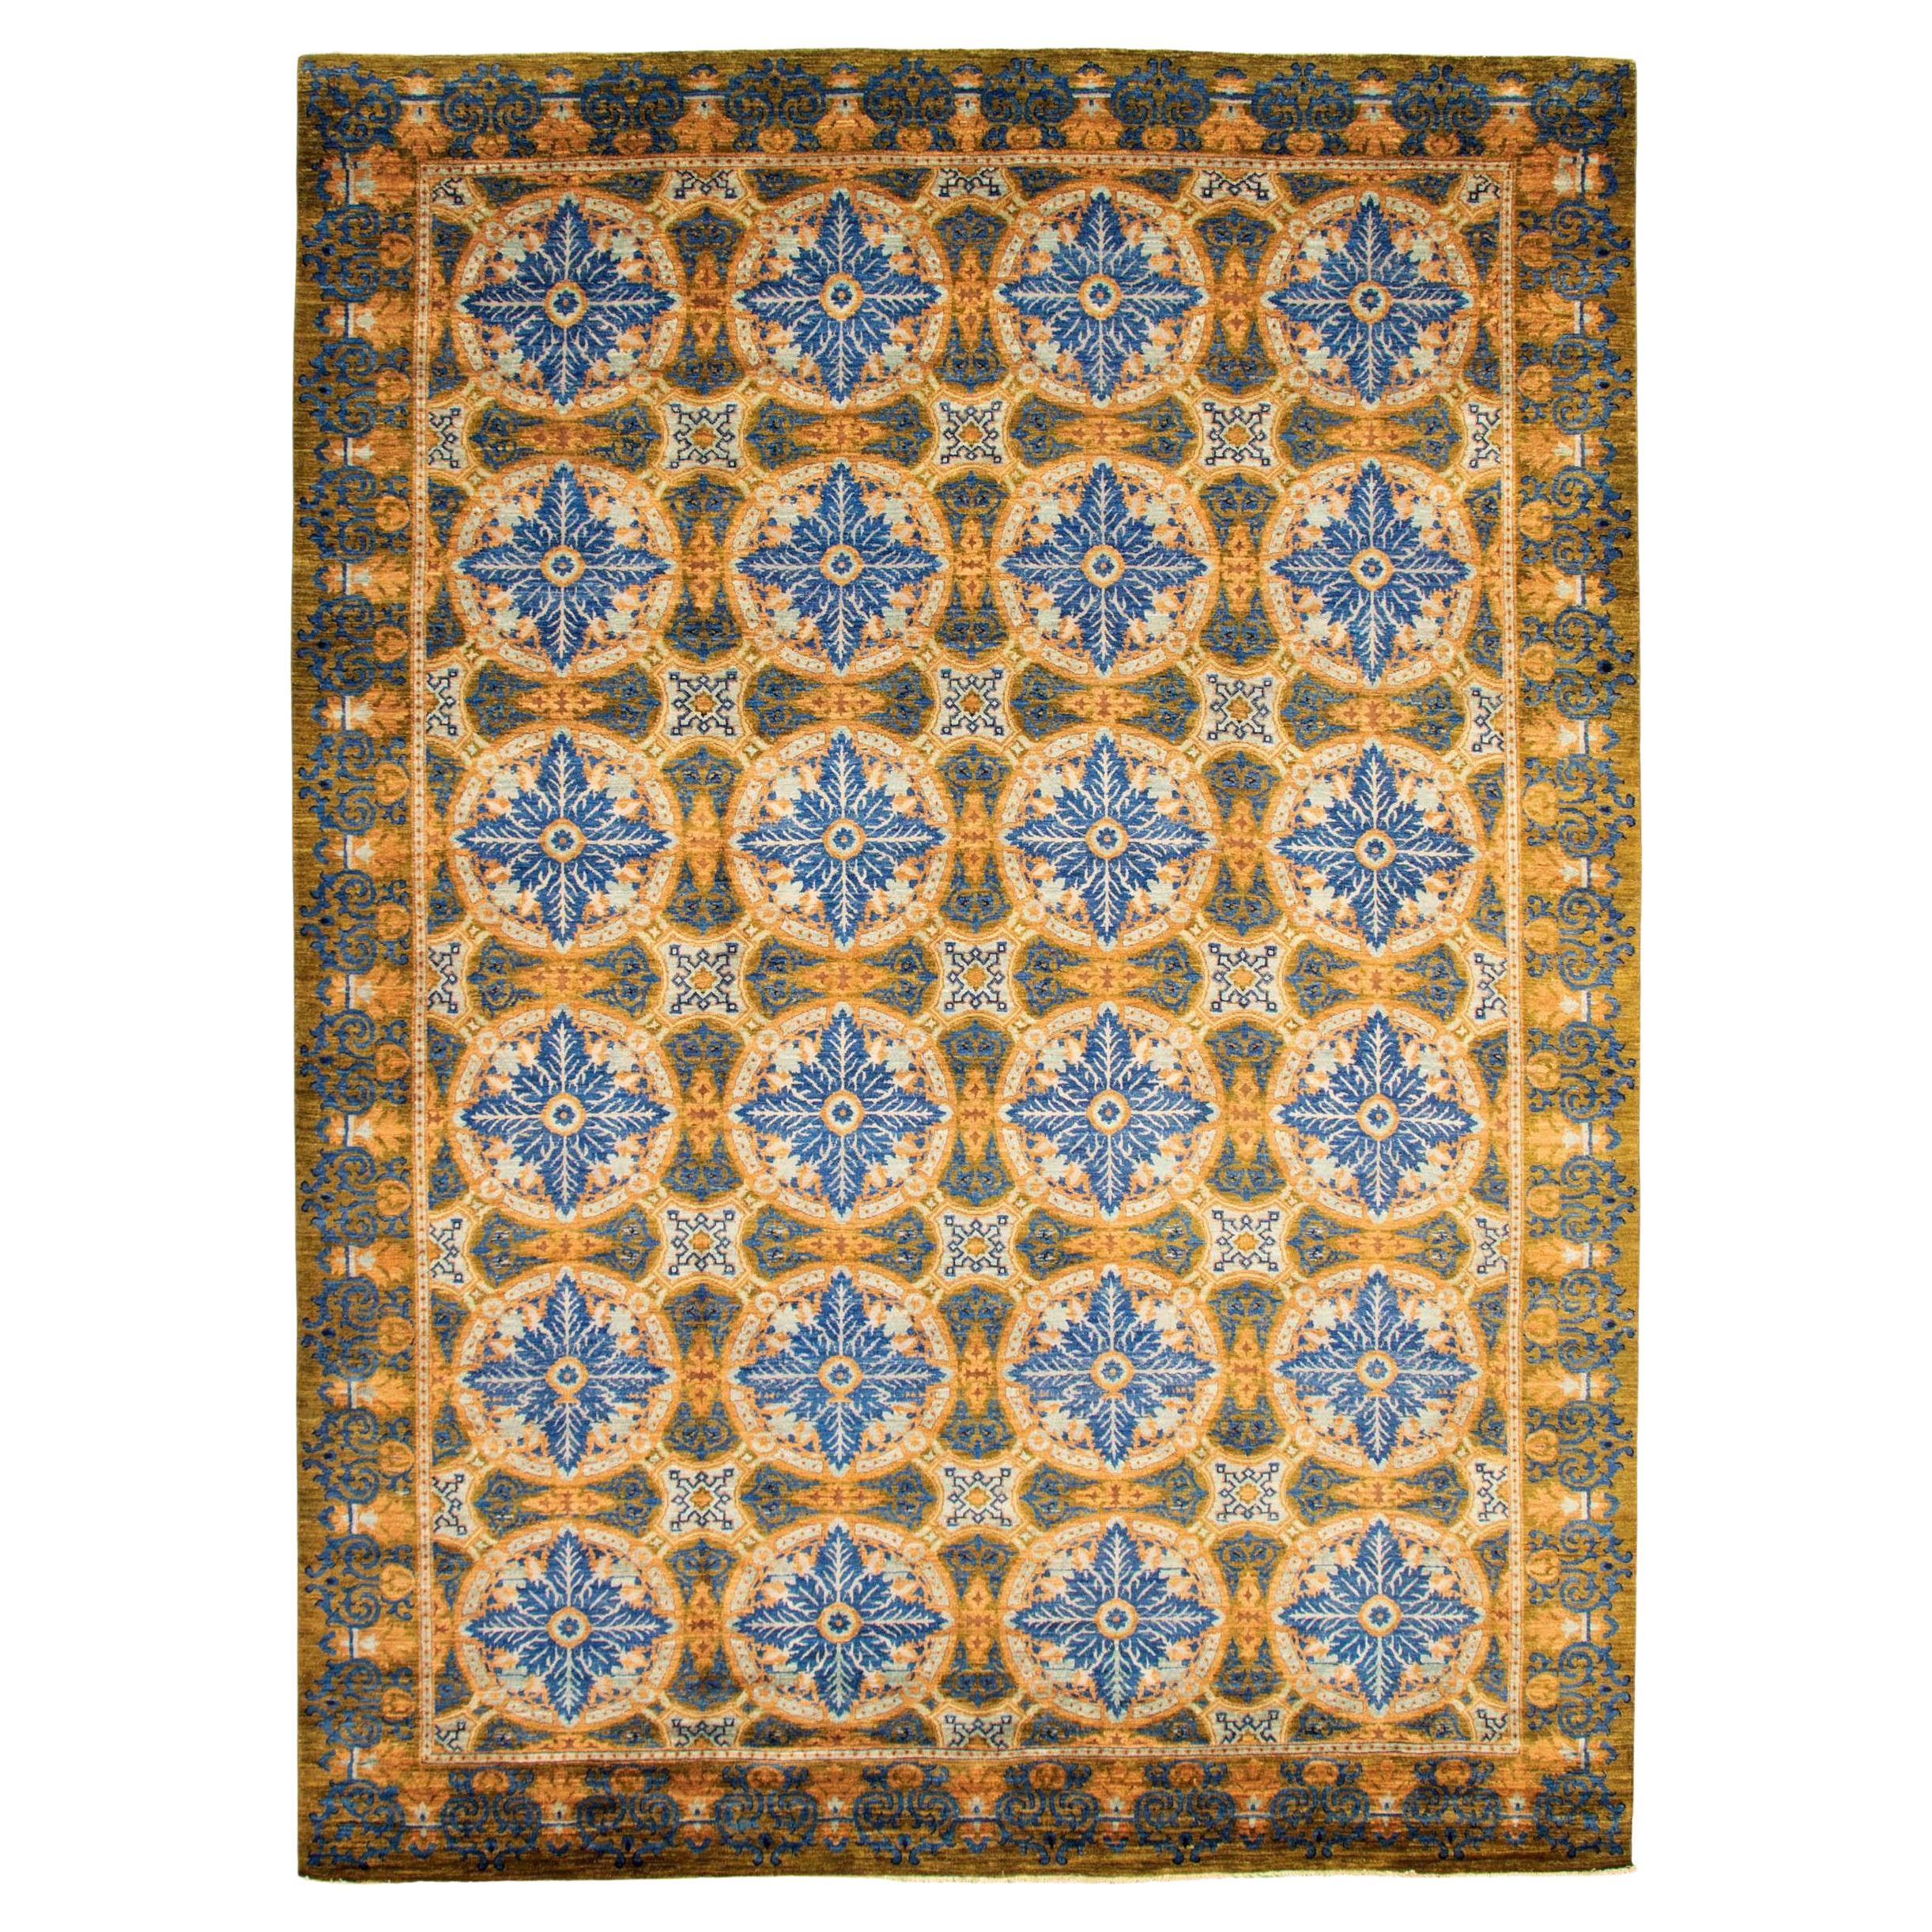 Geometric and Transitional Garden Carpet, Indigo, and Gold, Wool, 9' x 12'